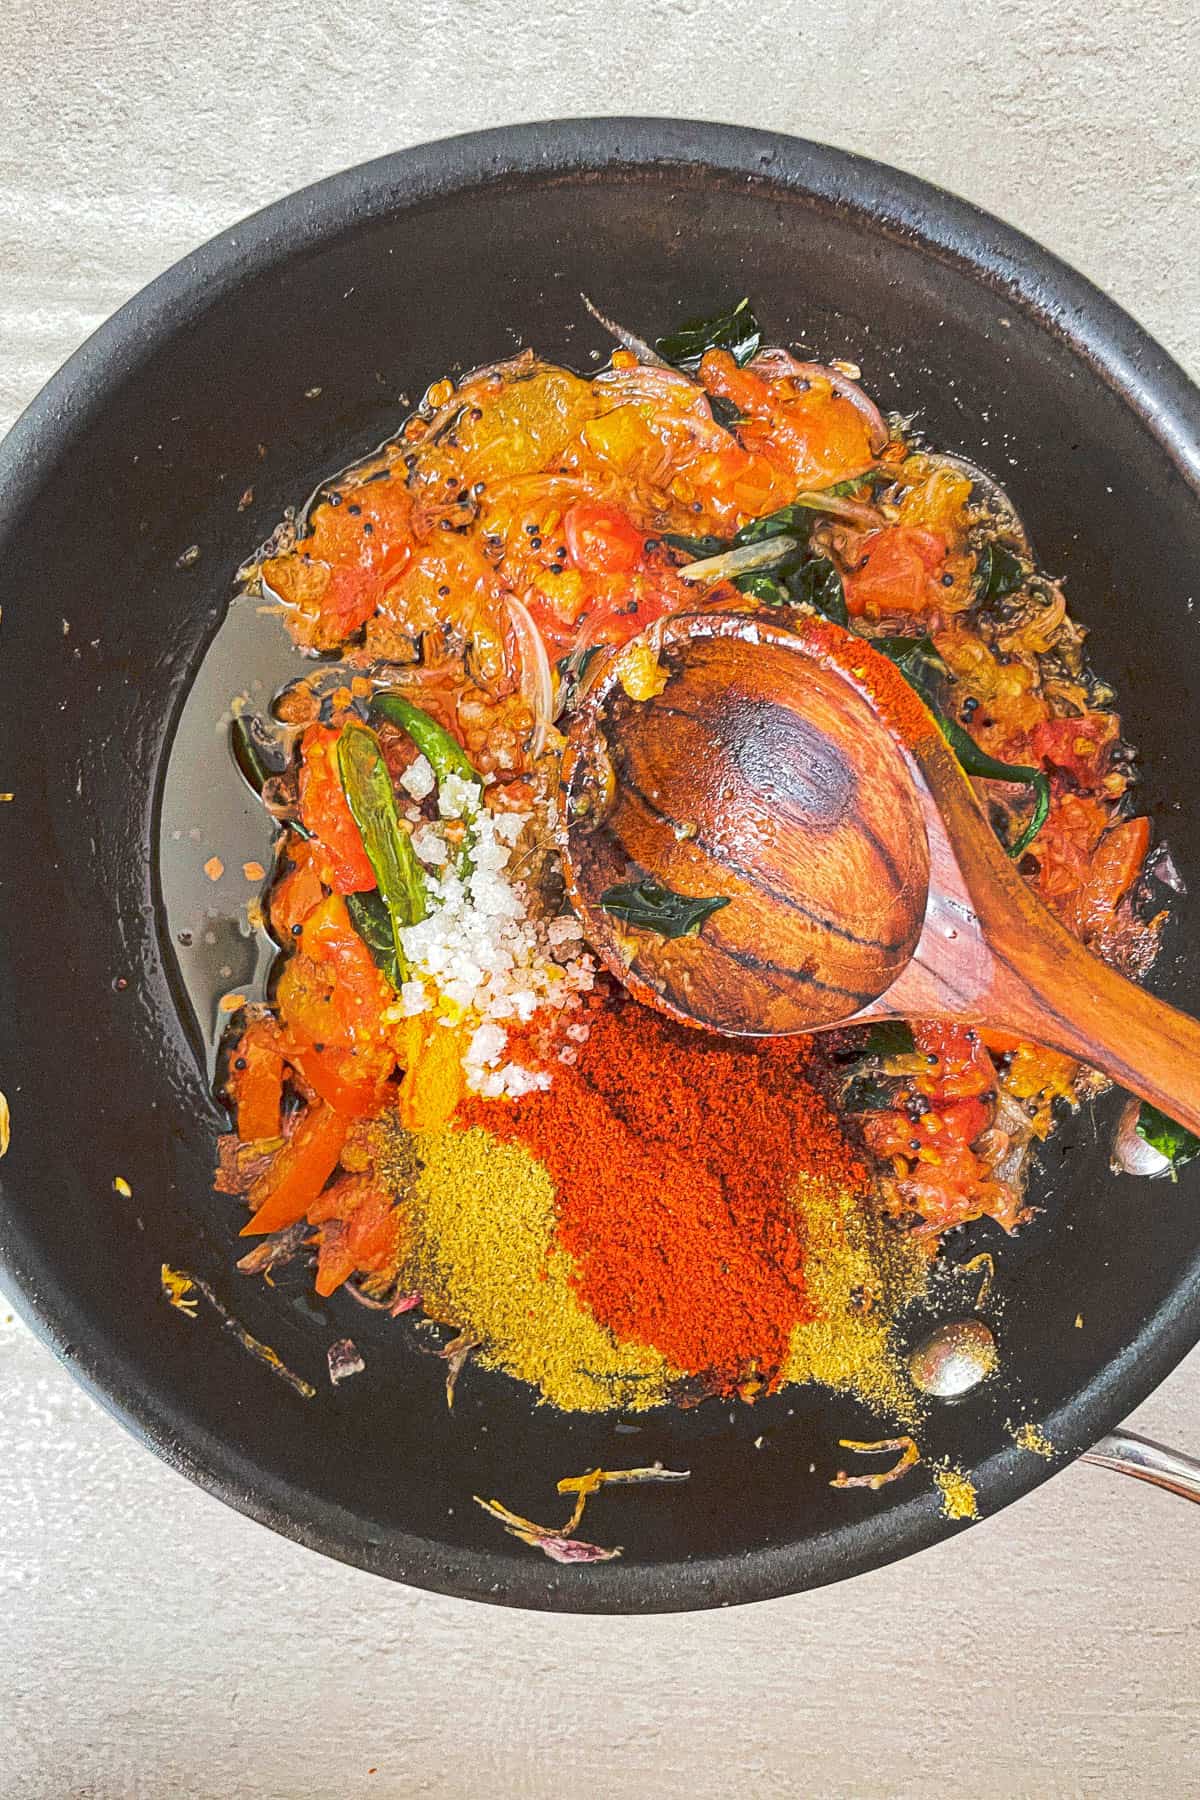 A kerala fish curry cooked in a frying pan with spices and stirred with a wooden spoon.